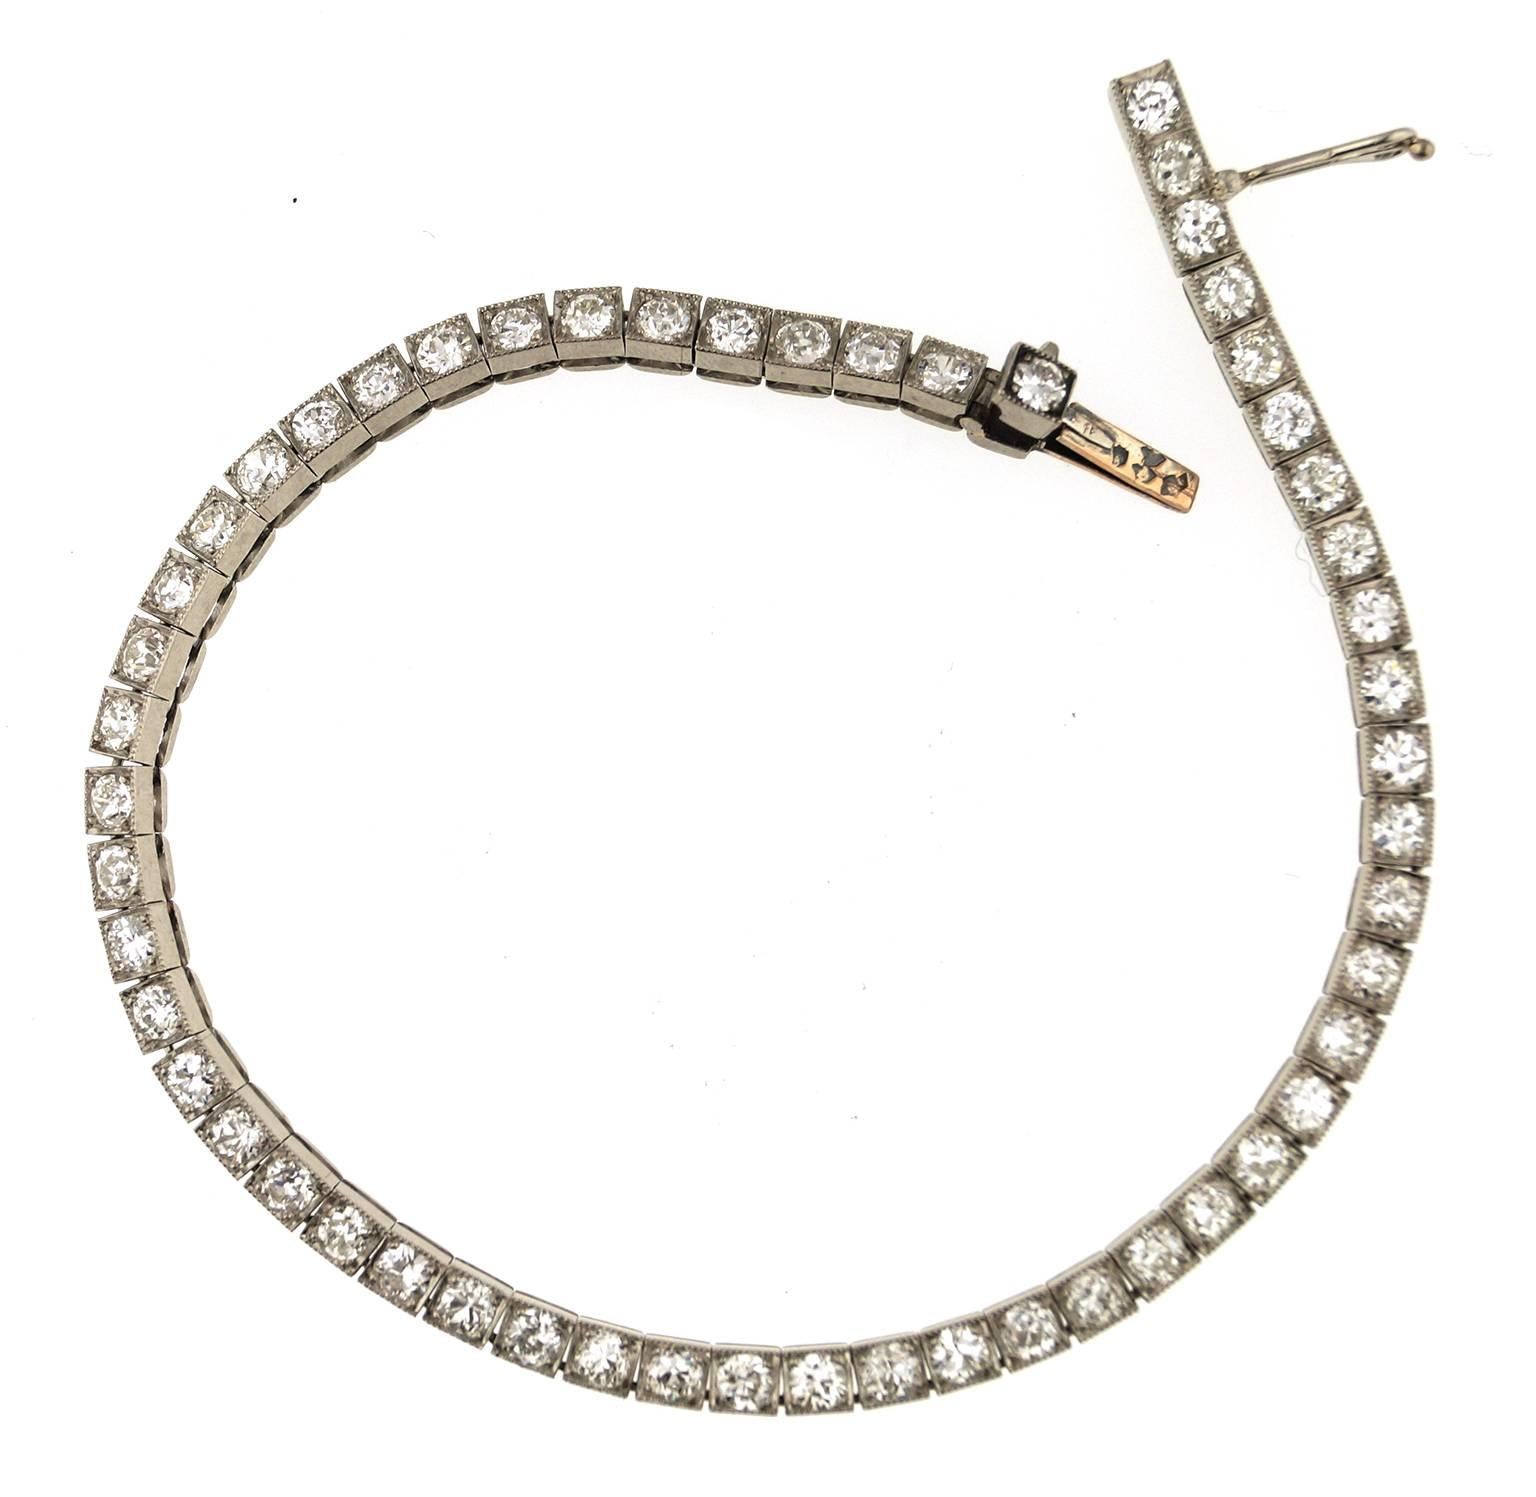  This beautiful Tennis  bracelet  by Cartier features 53 diamonds for an aproximate total weight of 6cts.
The bracelet features a hidden clasp with a safety.
This elegant  and quite rare bracelet is perfect for everyday wear but is also a